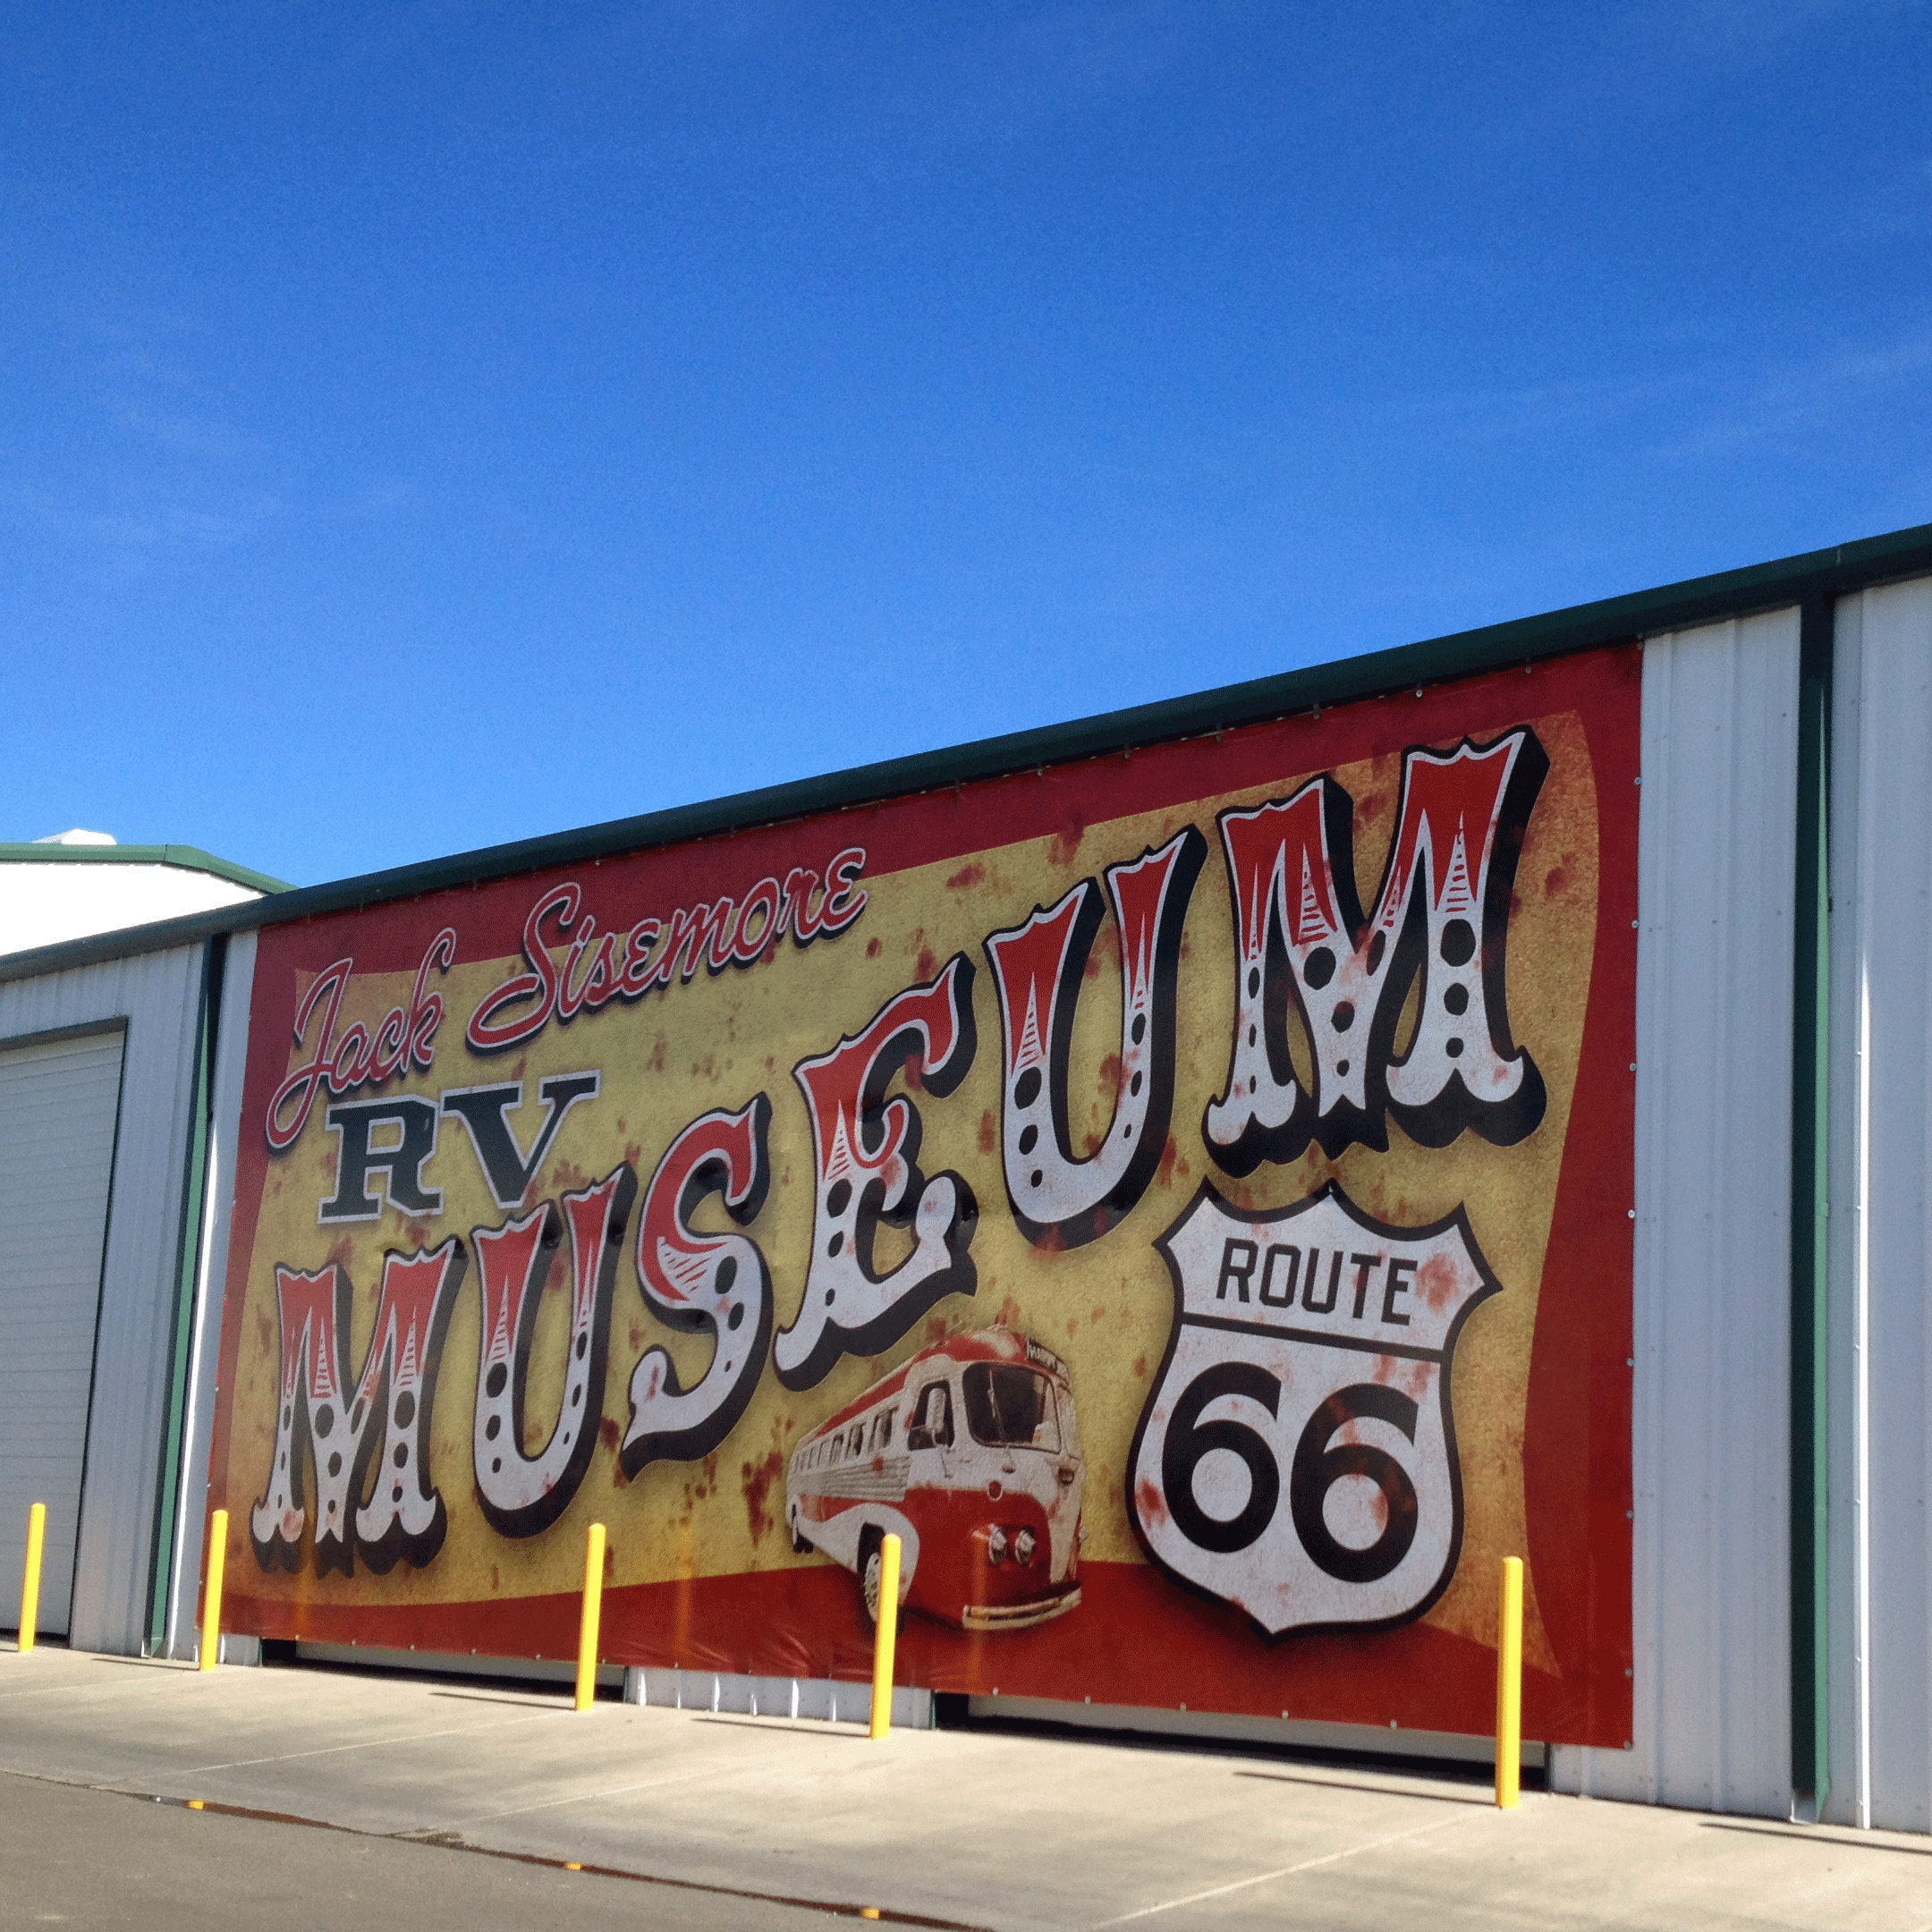 The museum is located only a couple of miles from the historic Route 66.